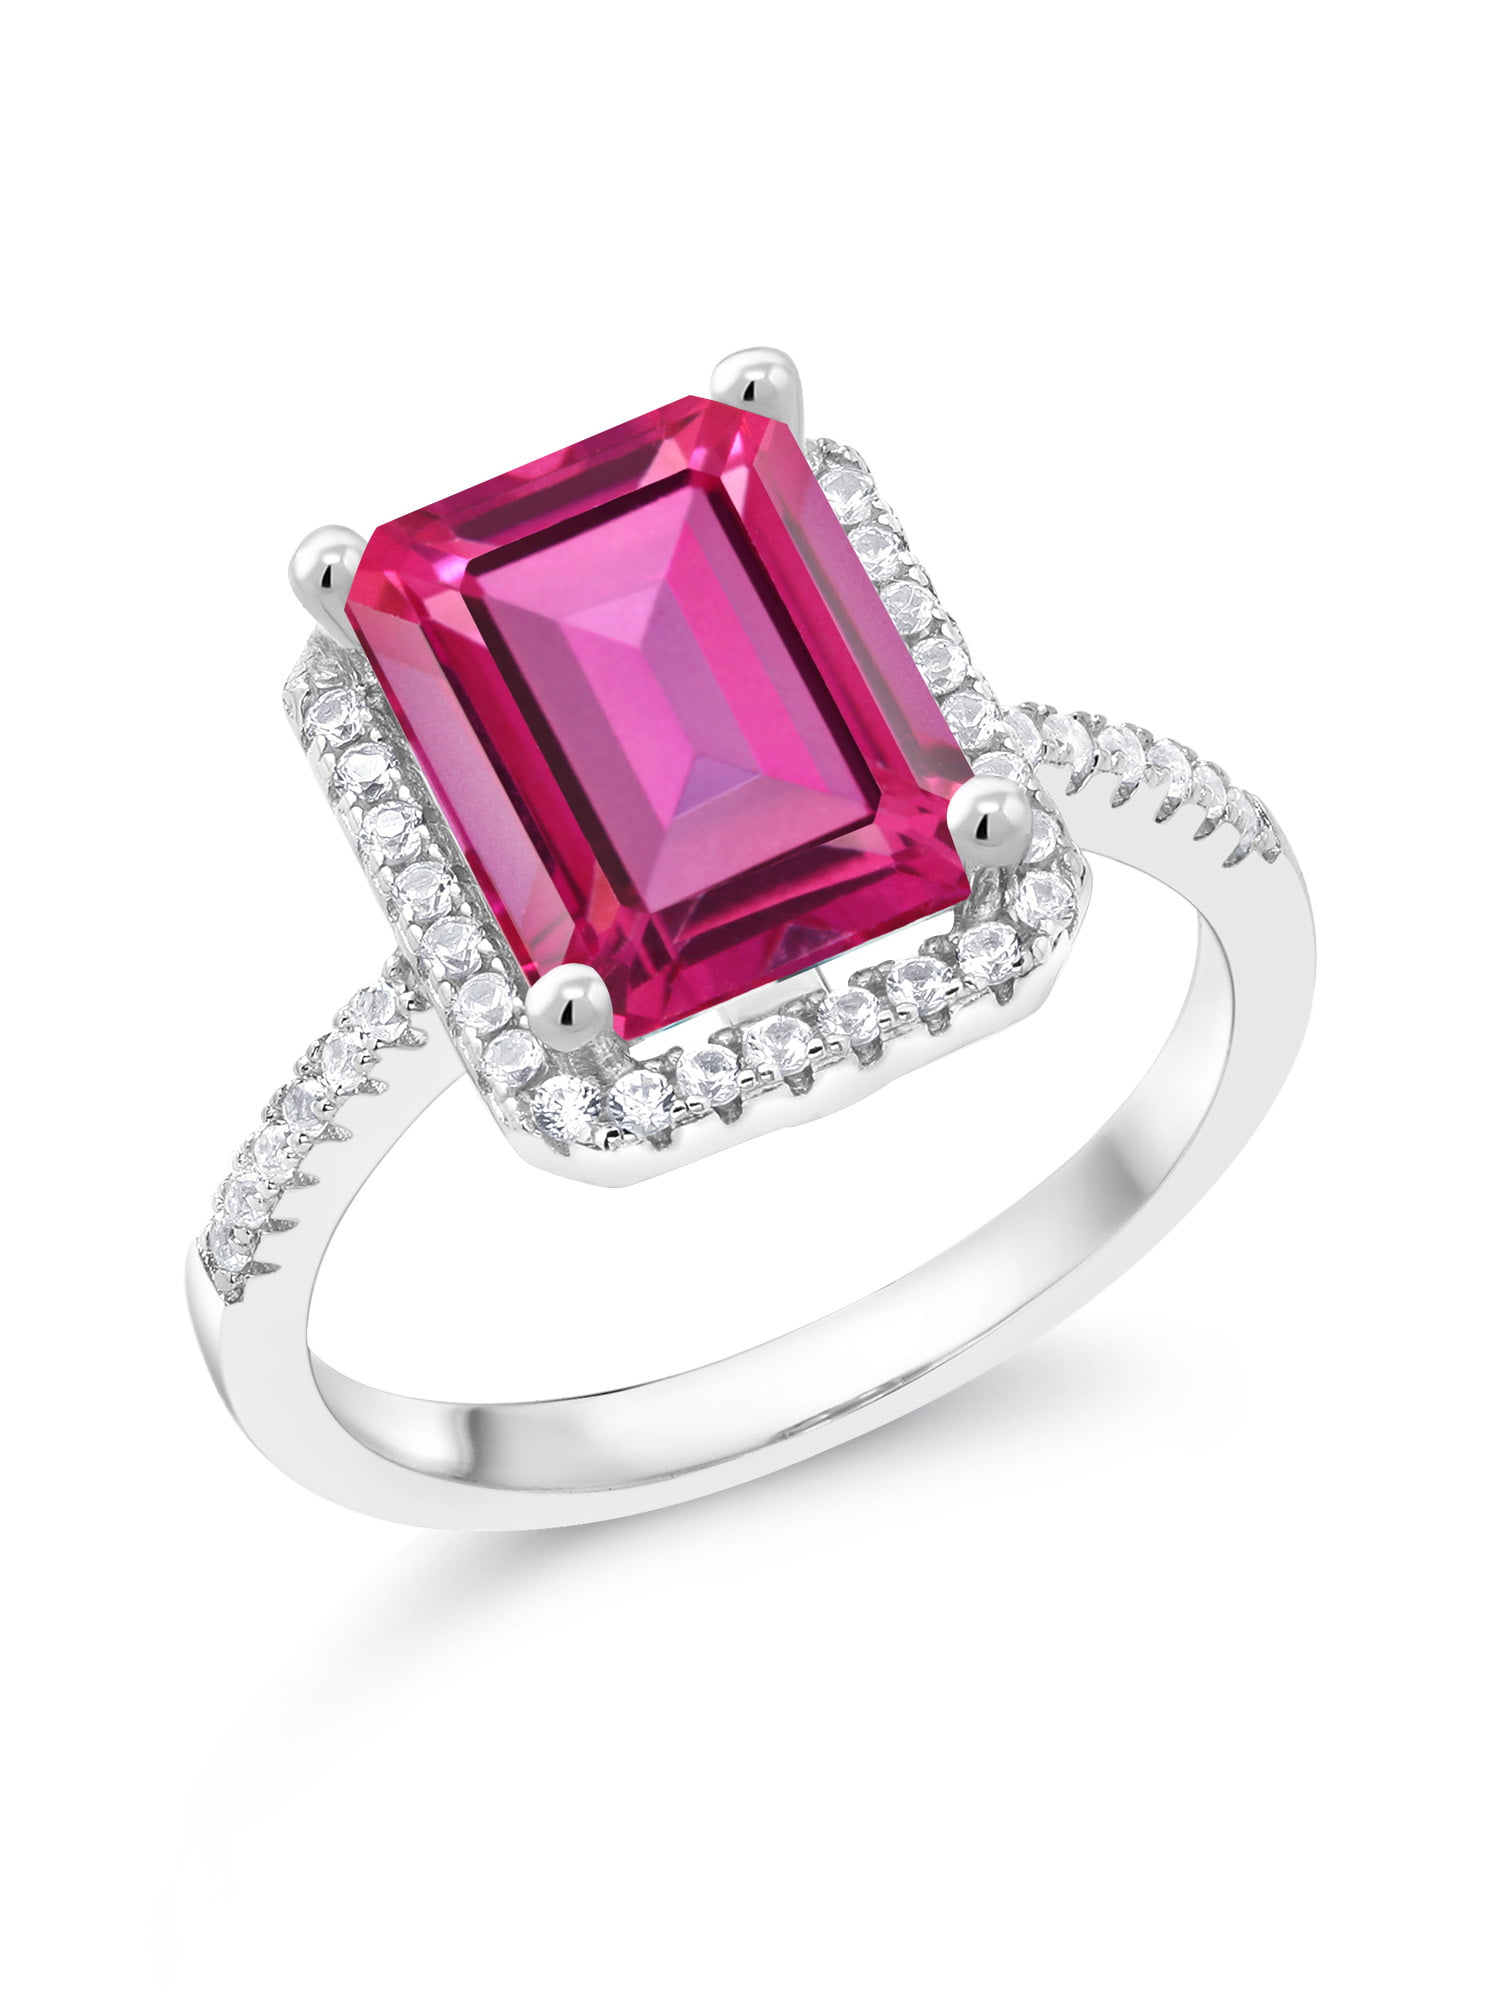 Gem Stone King 4.26 Ct Pure Pink Mystic Topaz White Created Sapphire 925 Sterling Silver Ring 